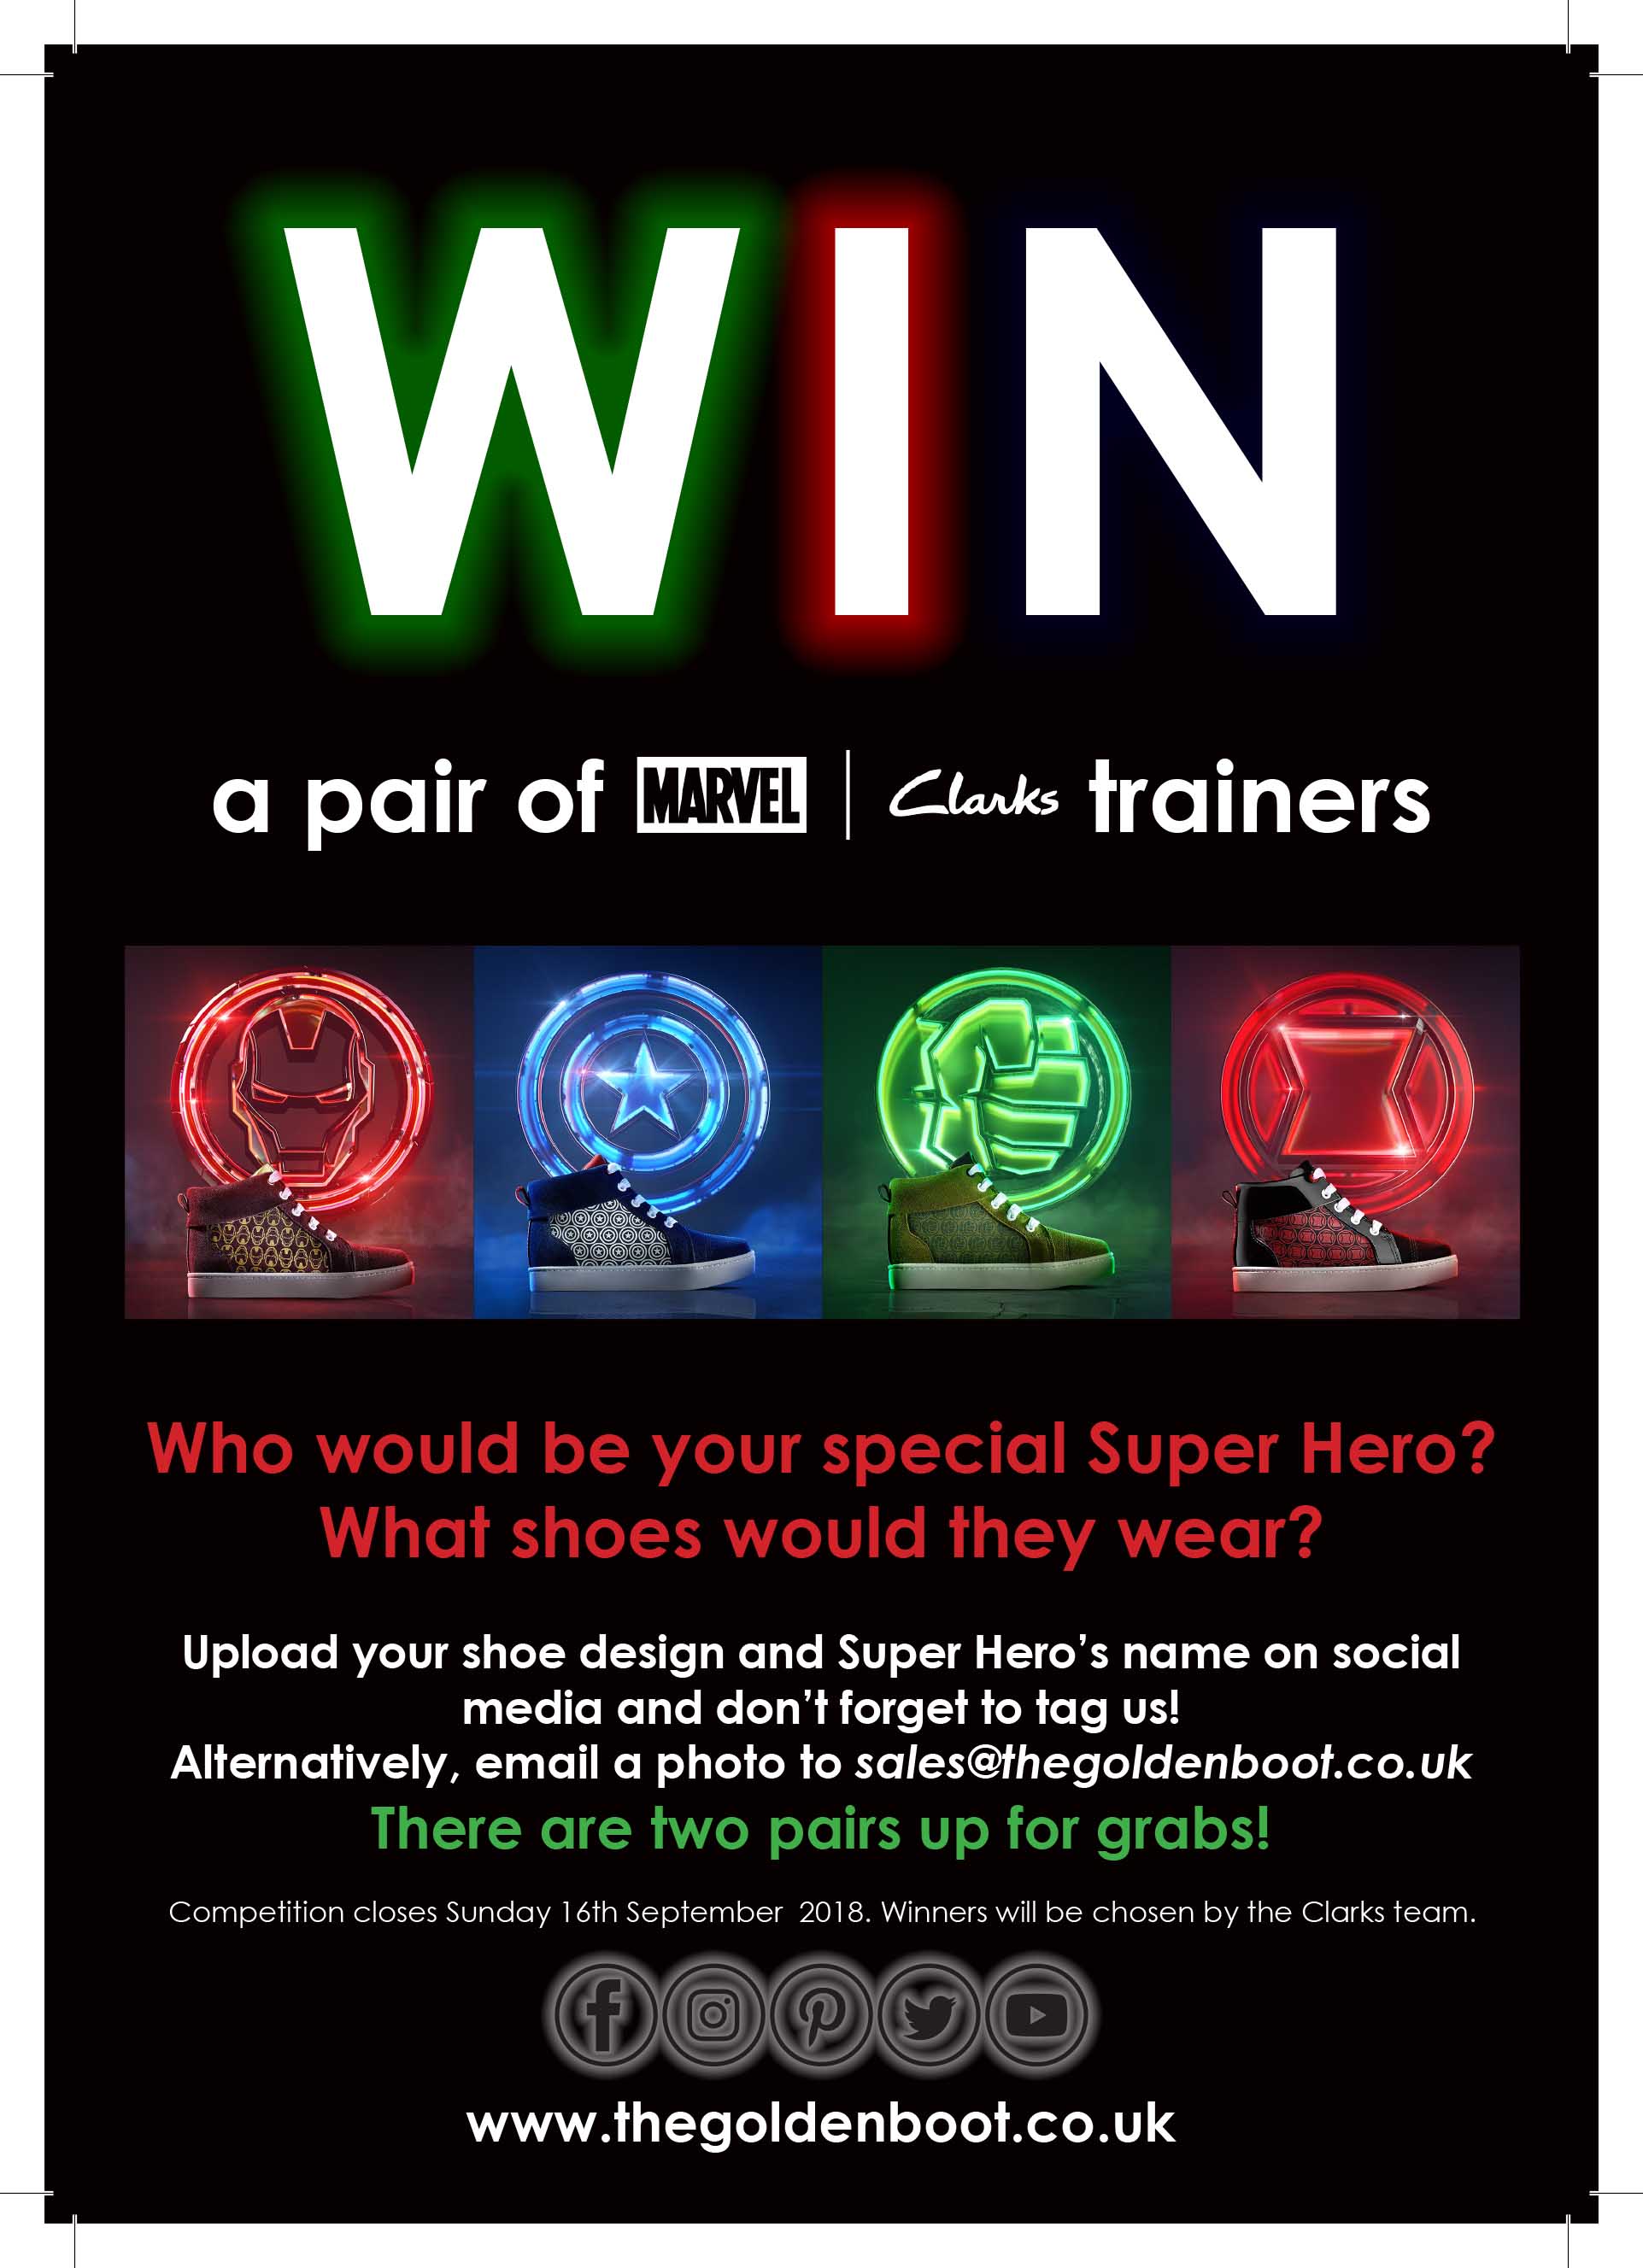 Enter our Facebook competition to win a pair of Marvel X Clarks Trainers